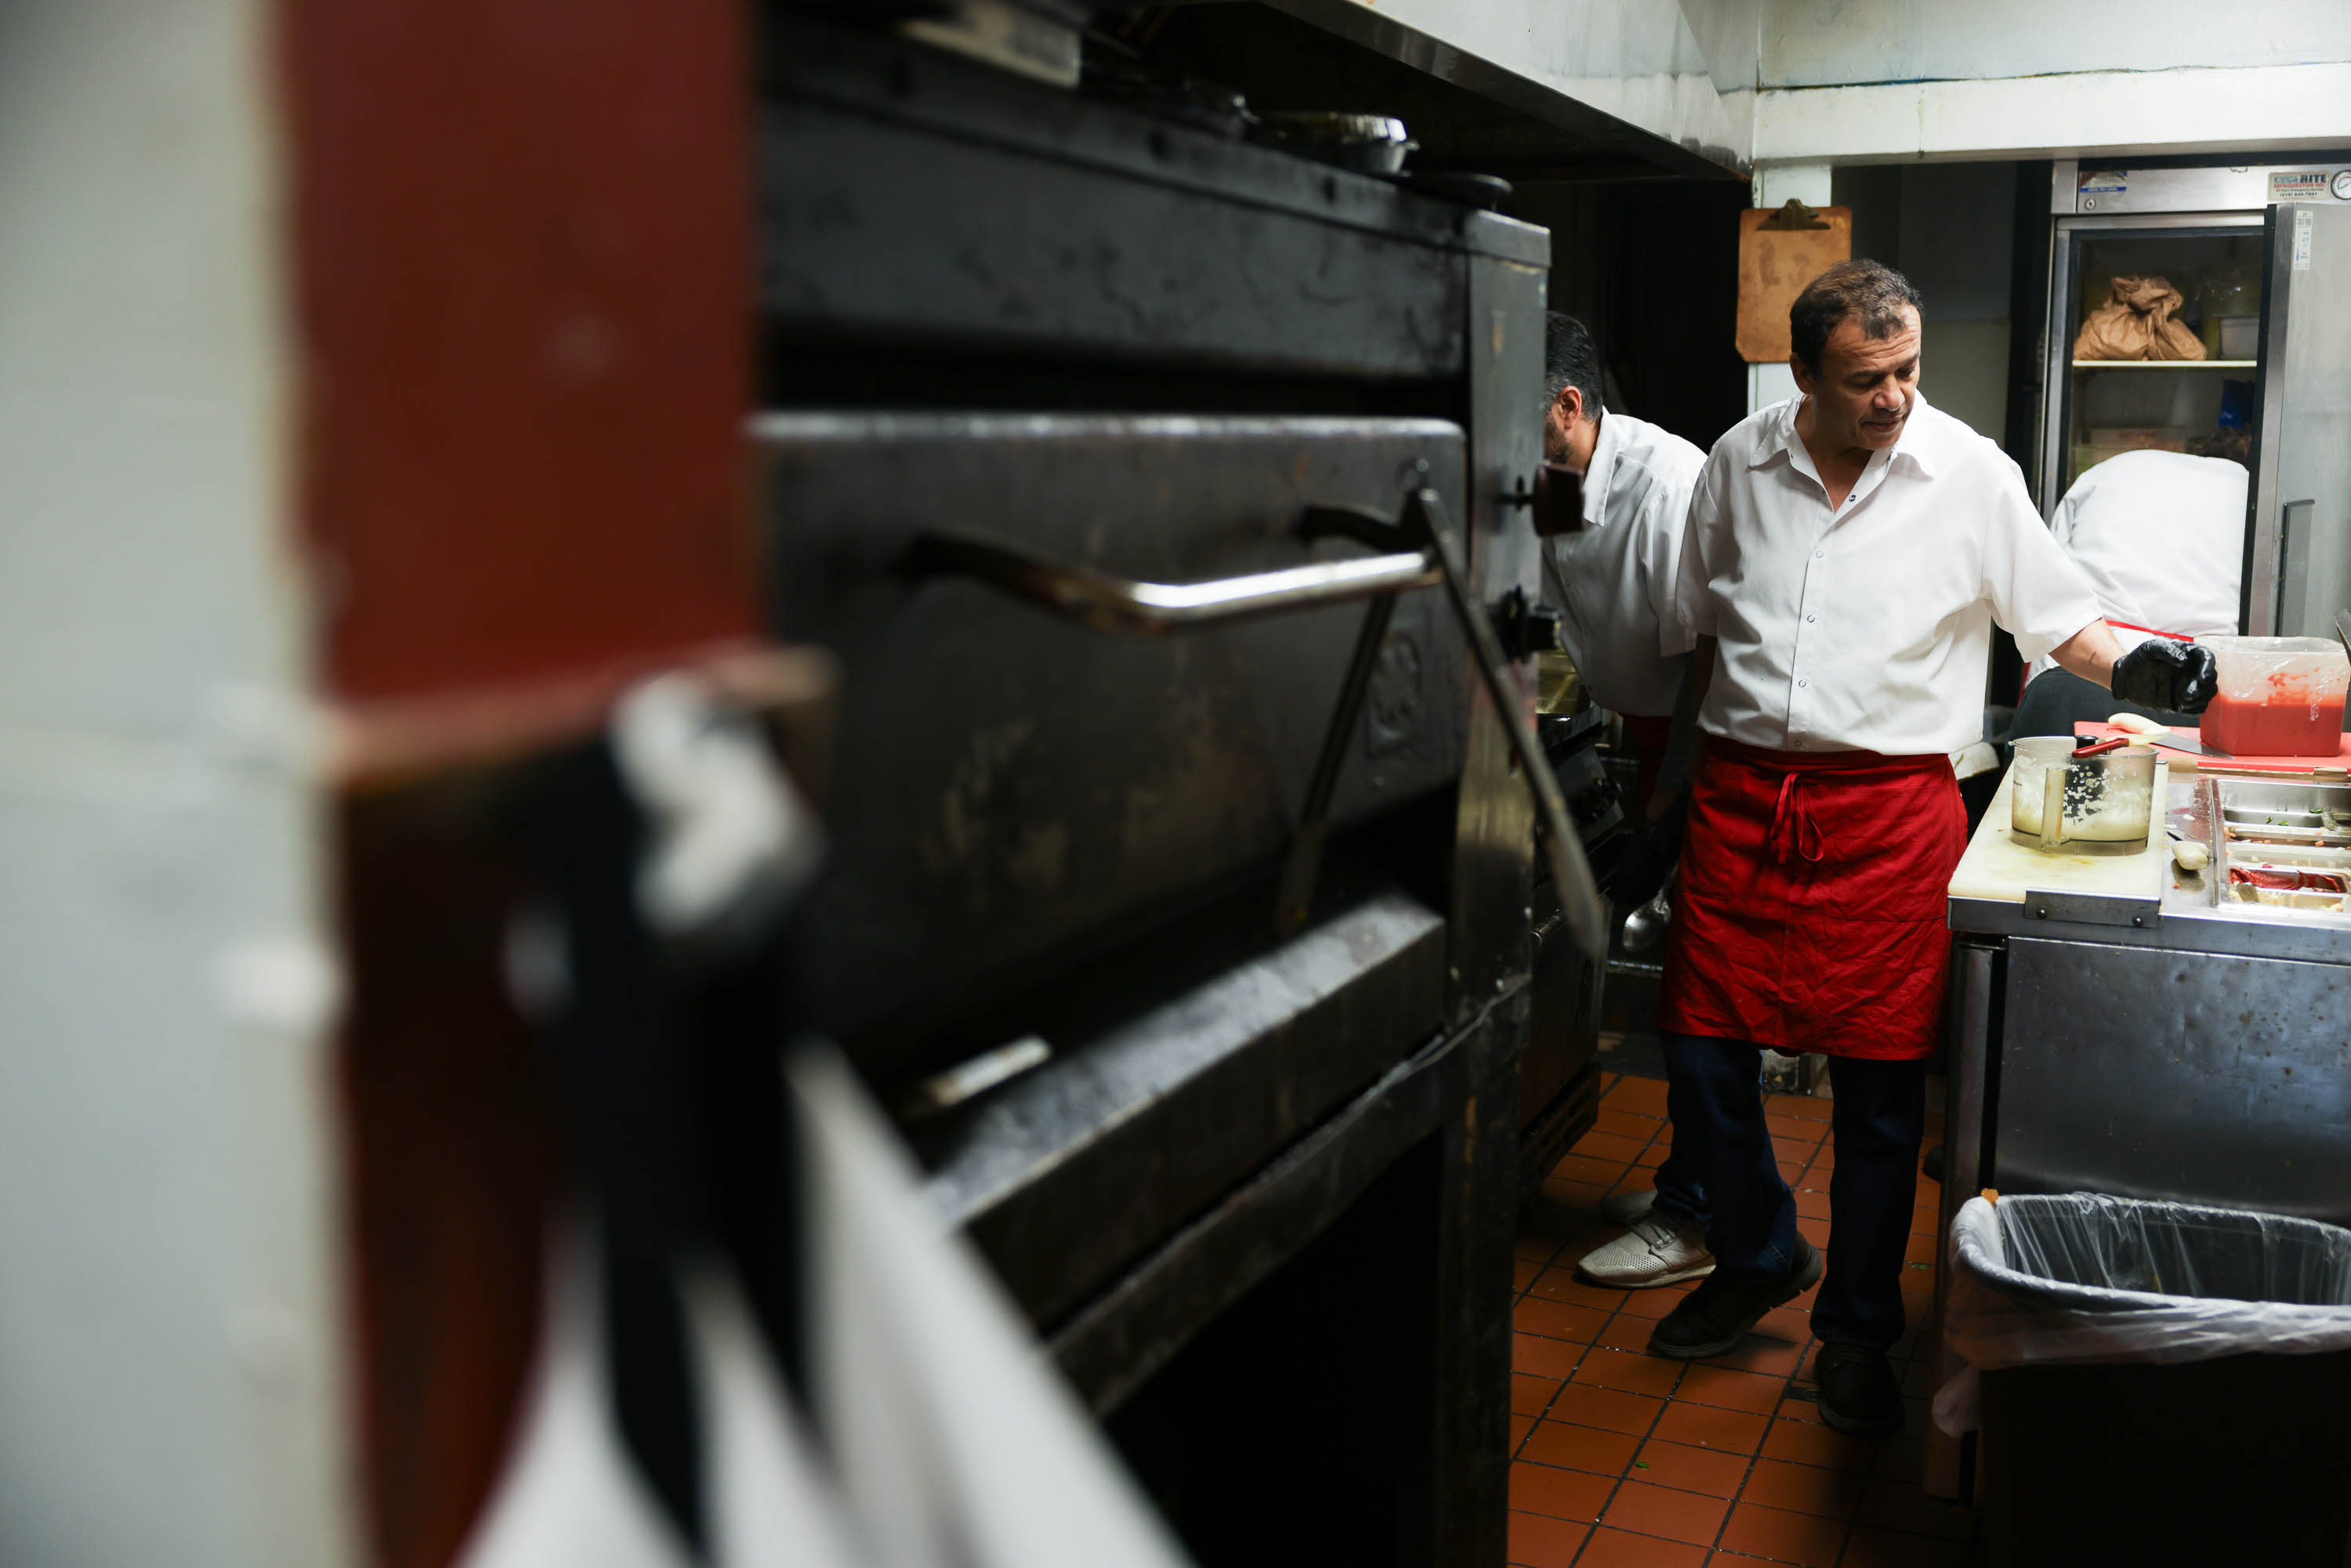 A man in a white shirt and red apron works in a restaurant kitchen near a large oven.